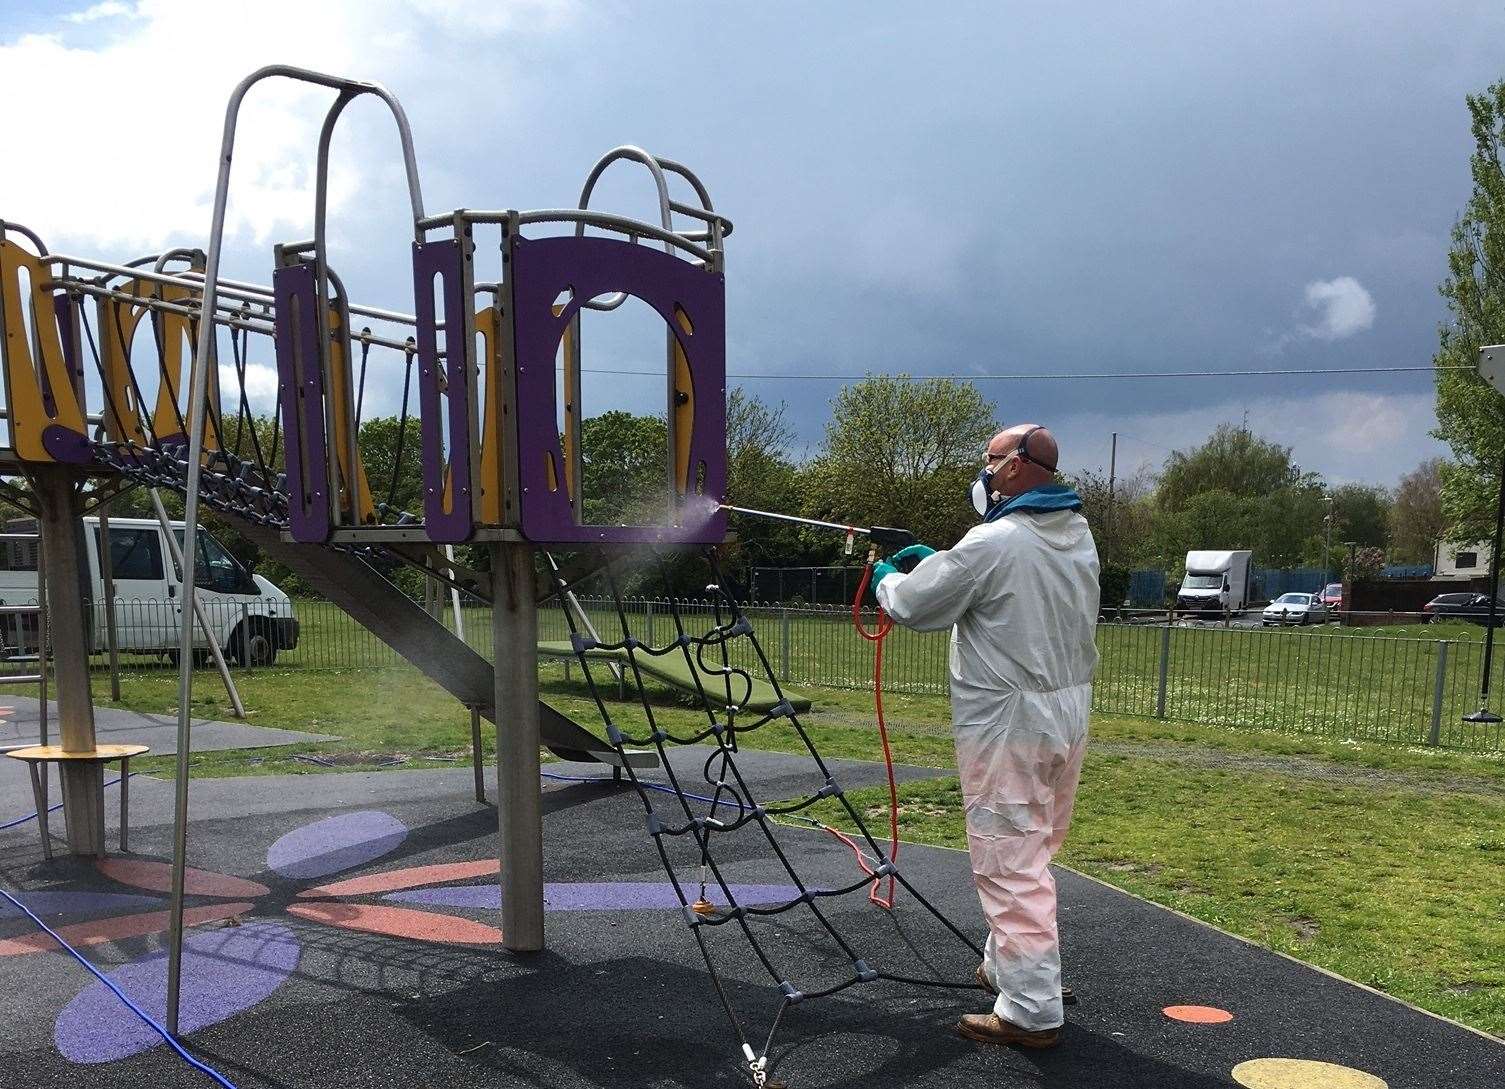 A major clean up operation is taking place at Hythe Green after human waste and fly tipping were left behind. Professional cleaners were also employed to help sanitise the area. Photo: Stephen Bailey